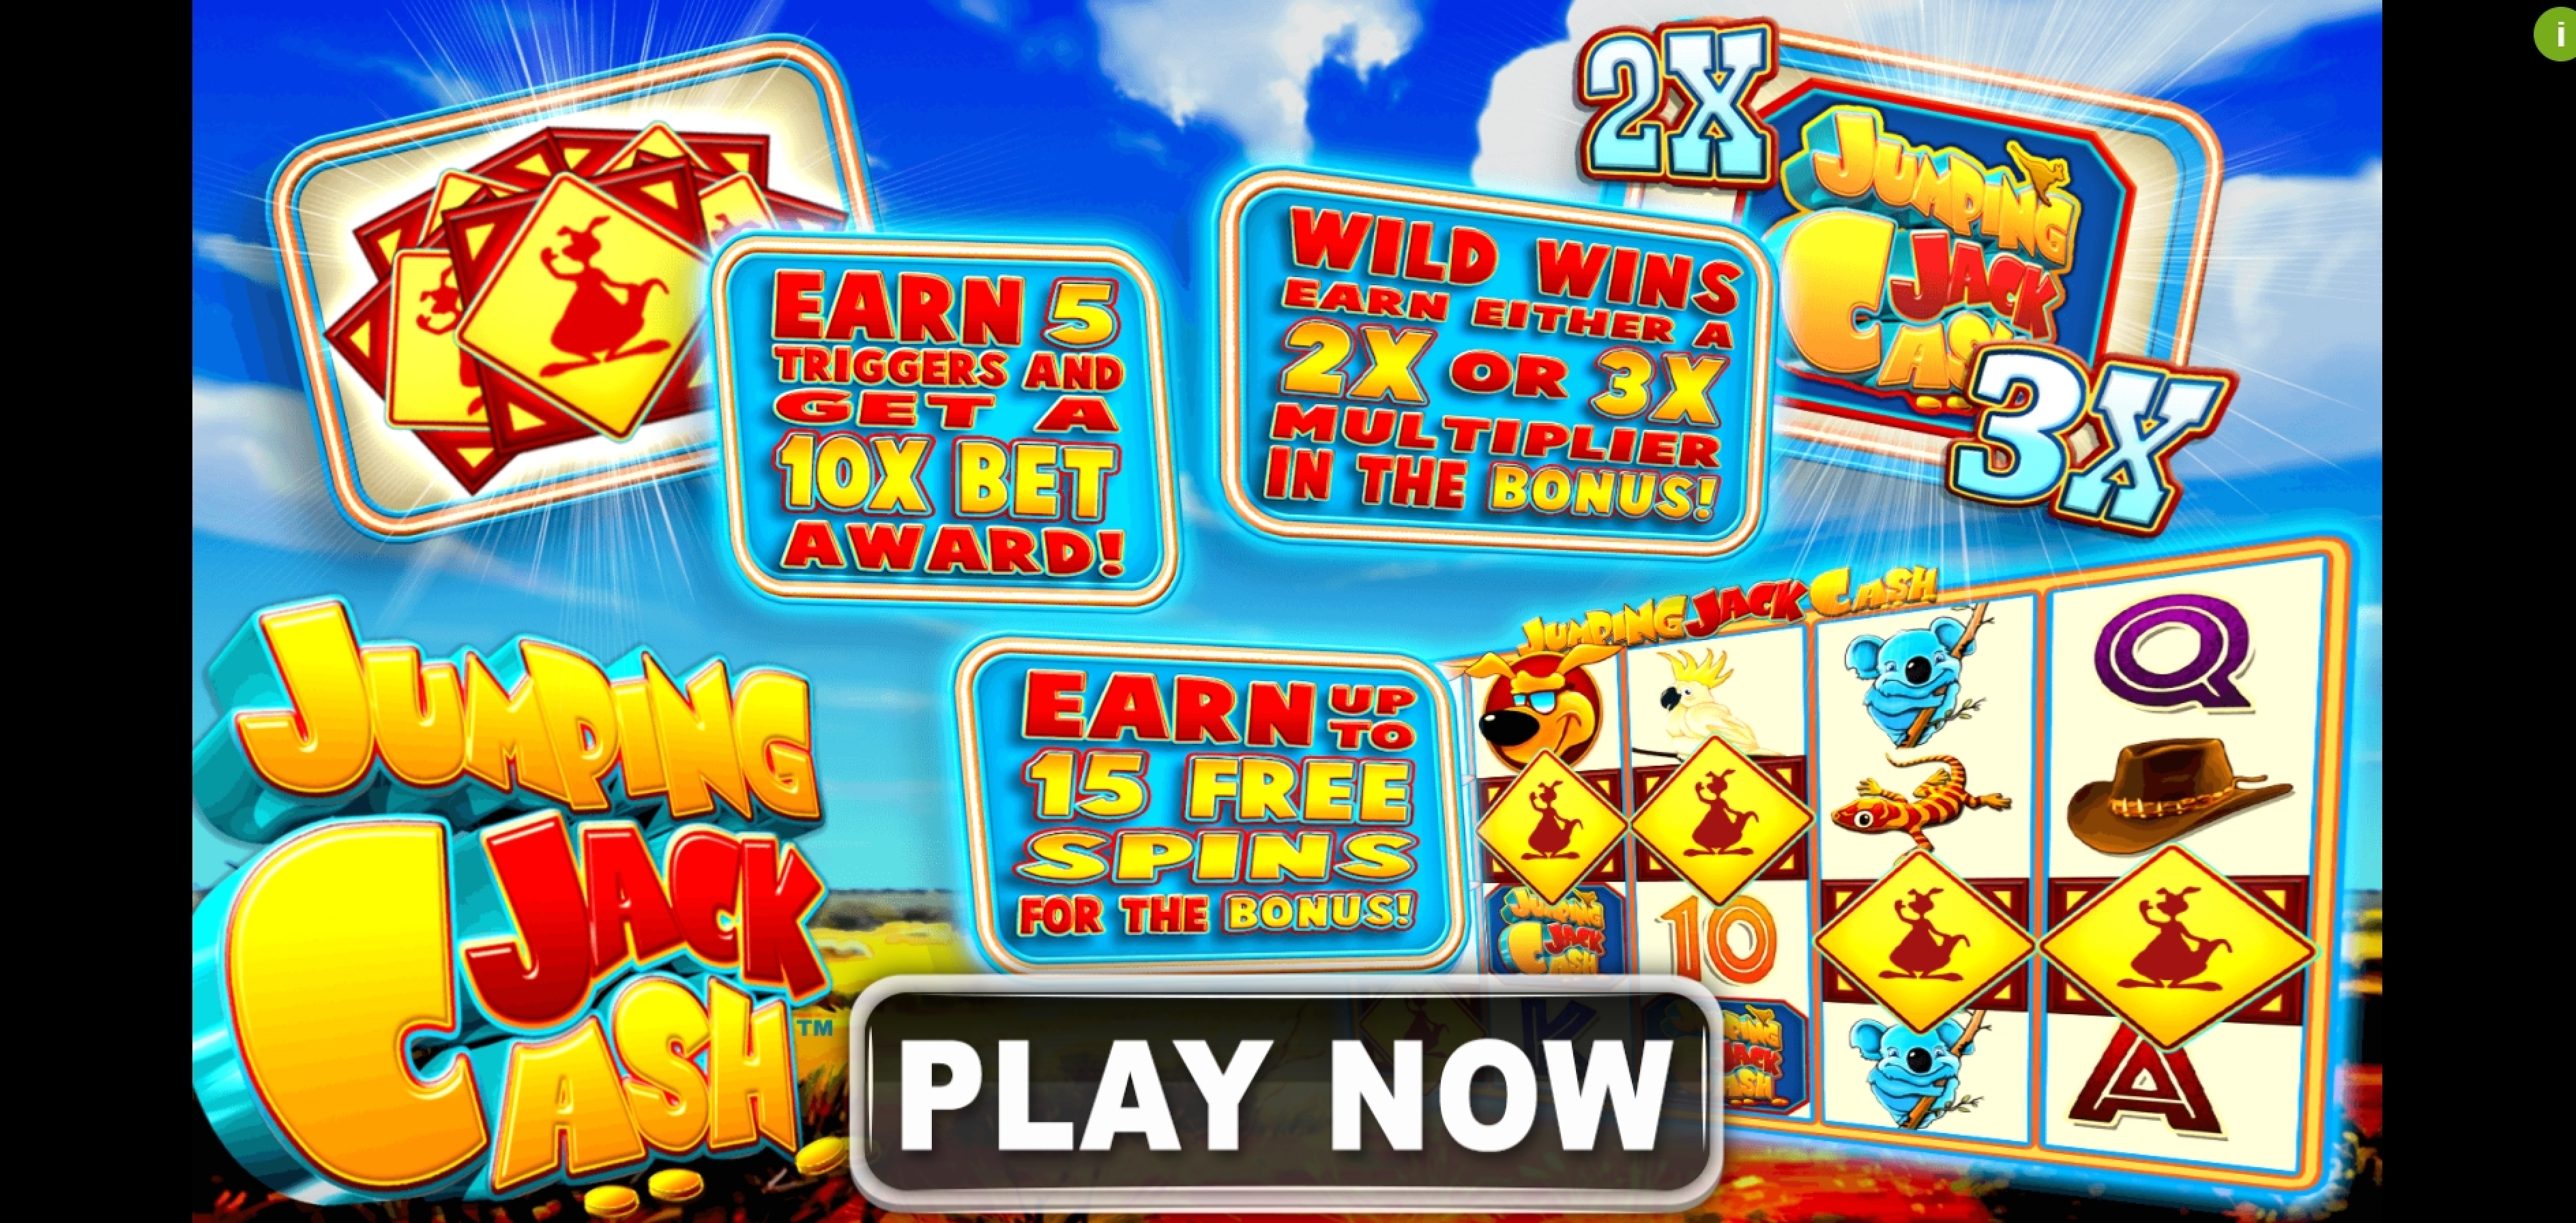 Play Jumping Jack Cash Free Casino Slot Game by Spin Games